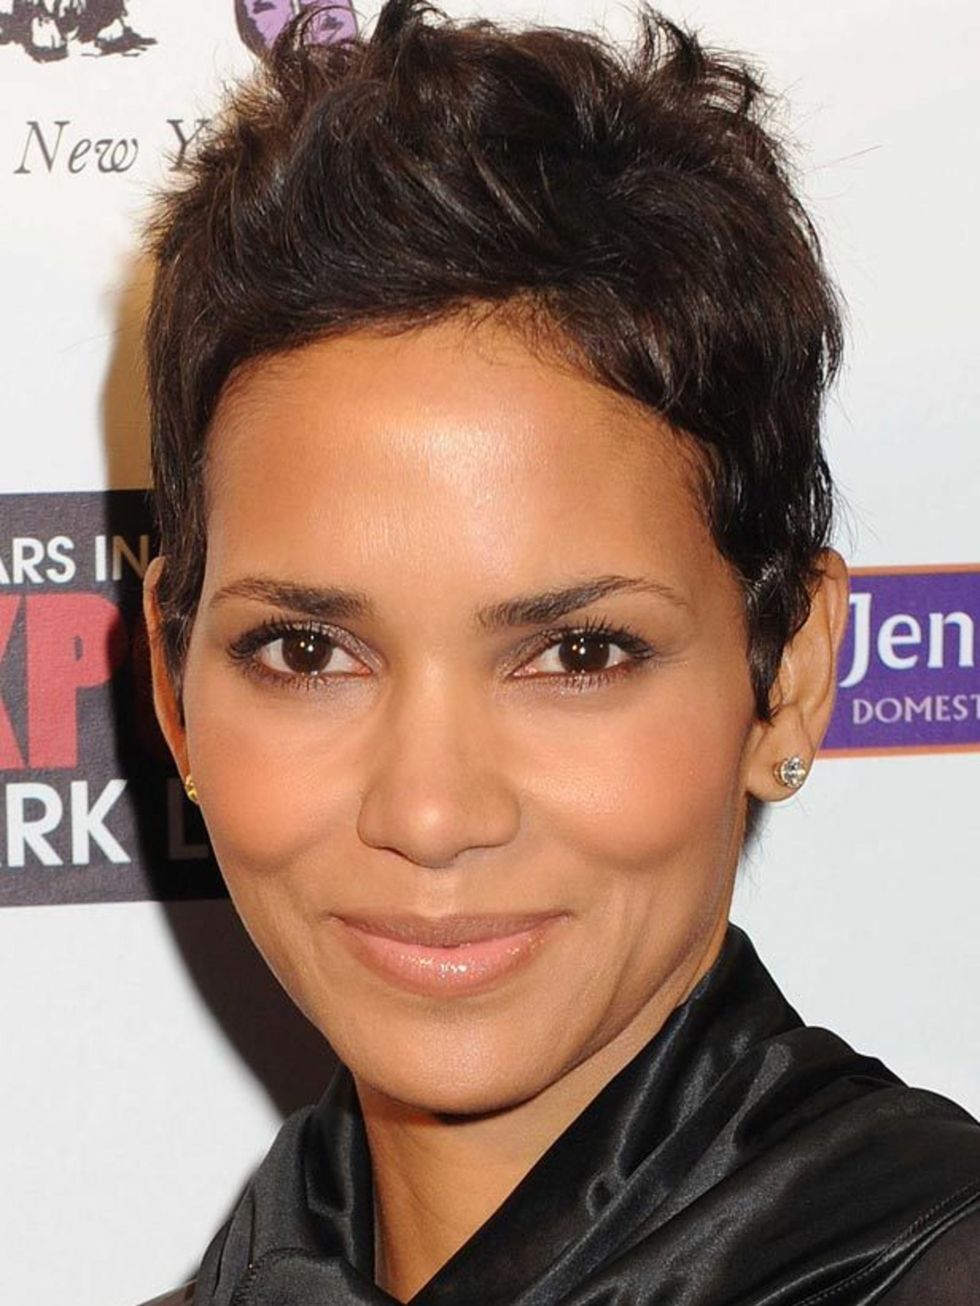 <p><a href="http://www.elleuk.com/find/%28term%29/halle-berry">Click now</a> to read more about Halle on ELLE...</p>